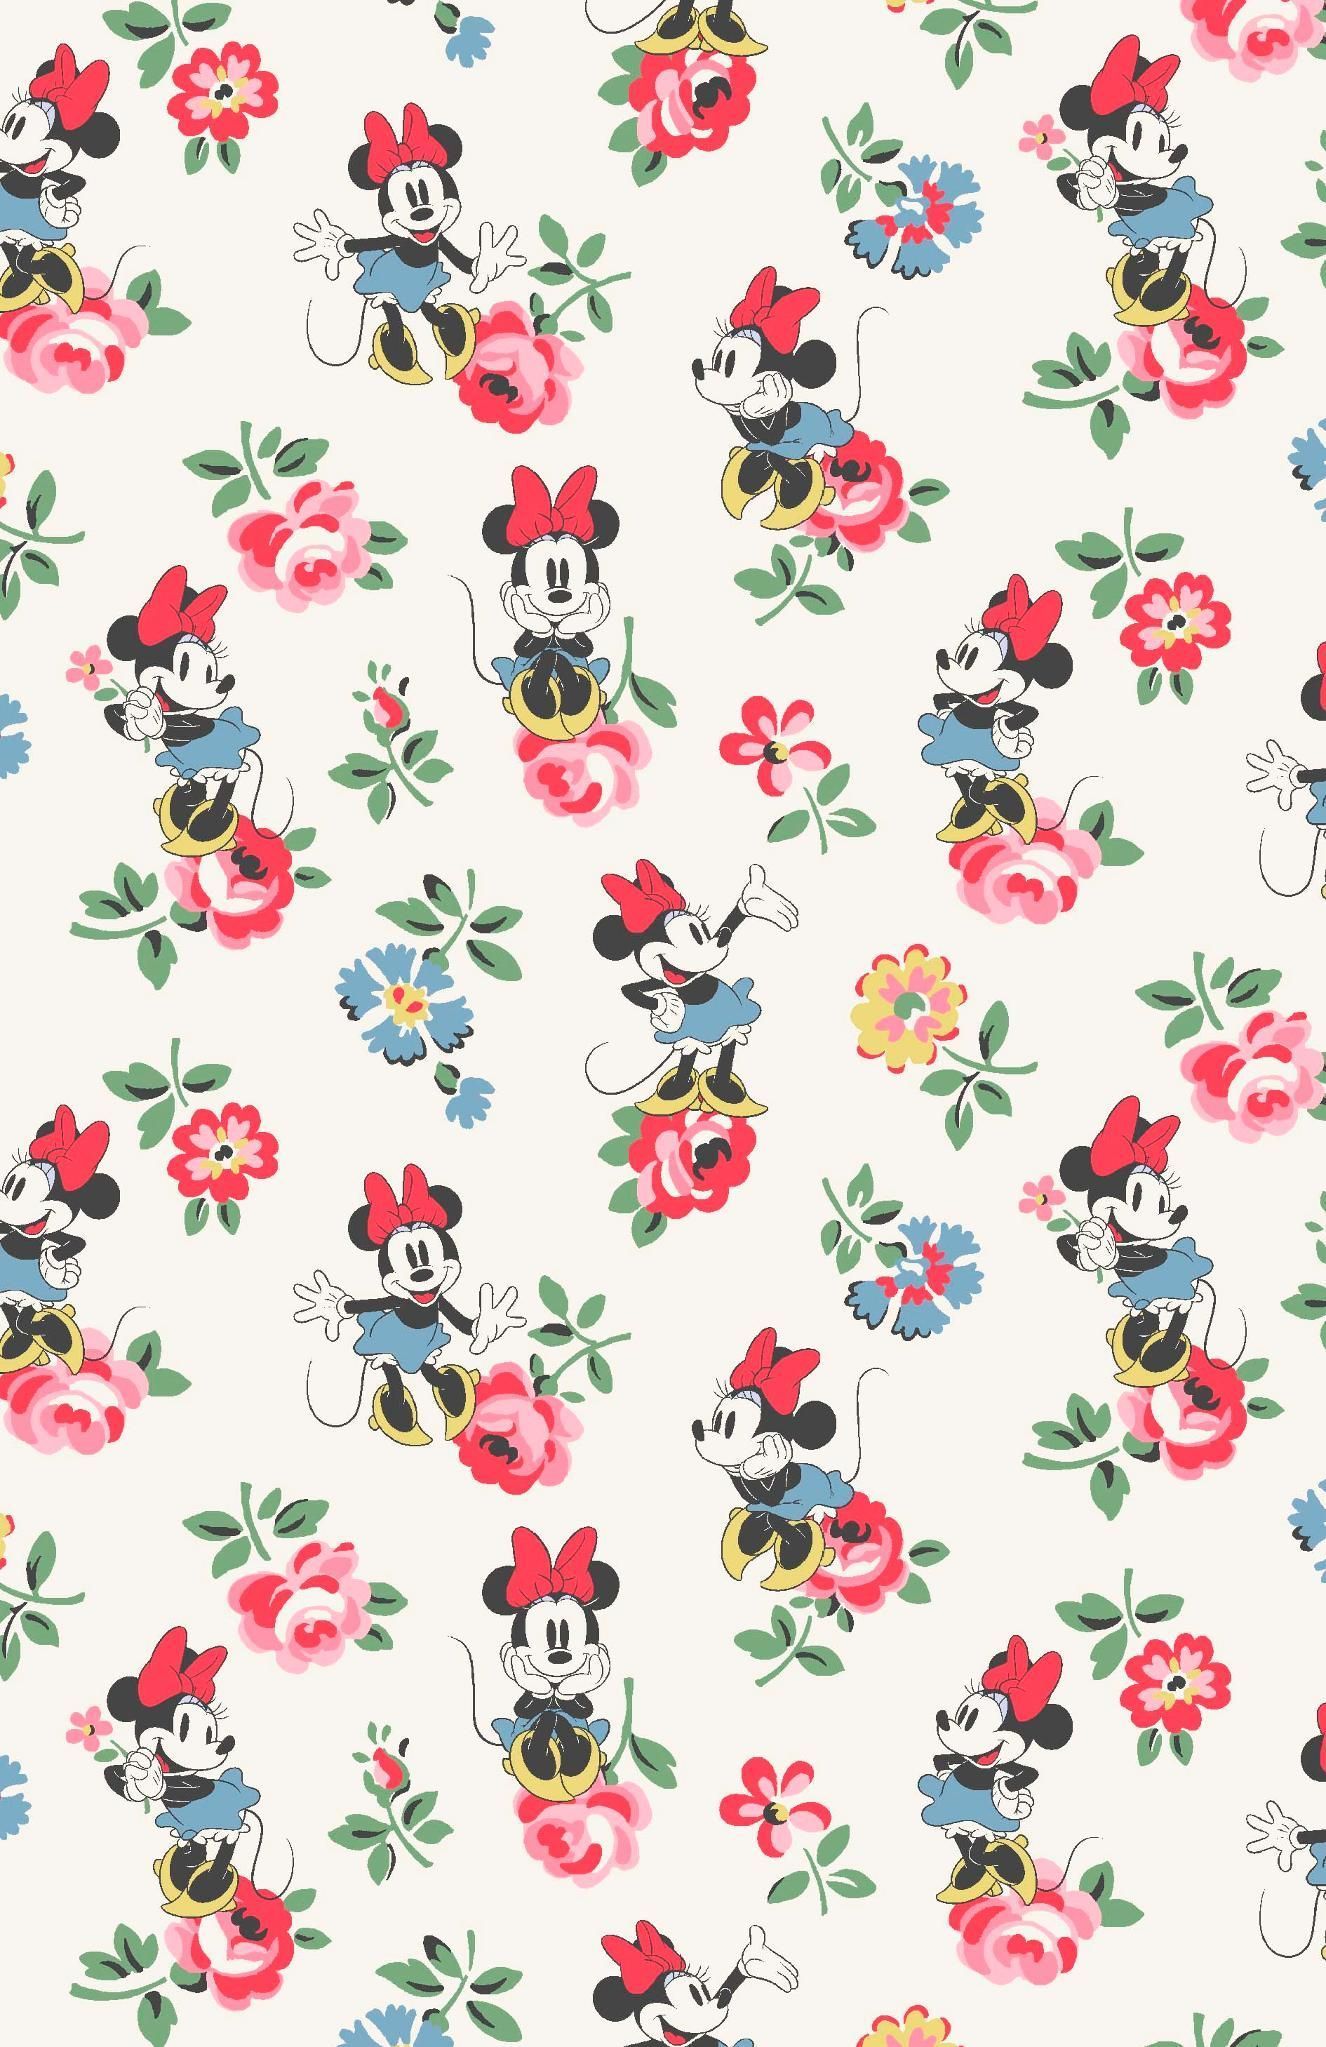 A pattern of minnie mouse and mickey mice - Minnie Mouse